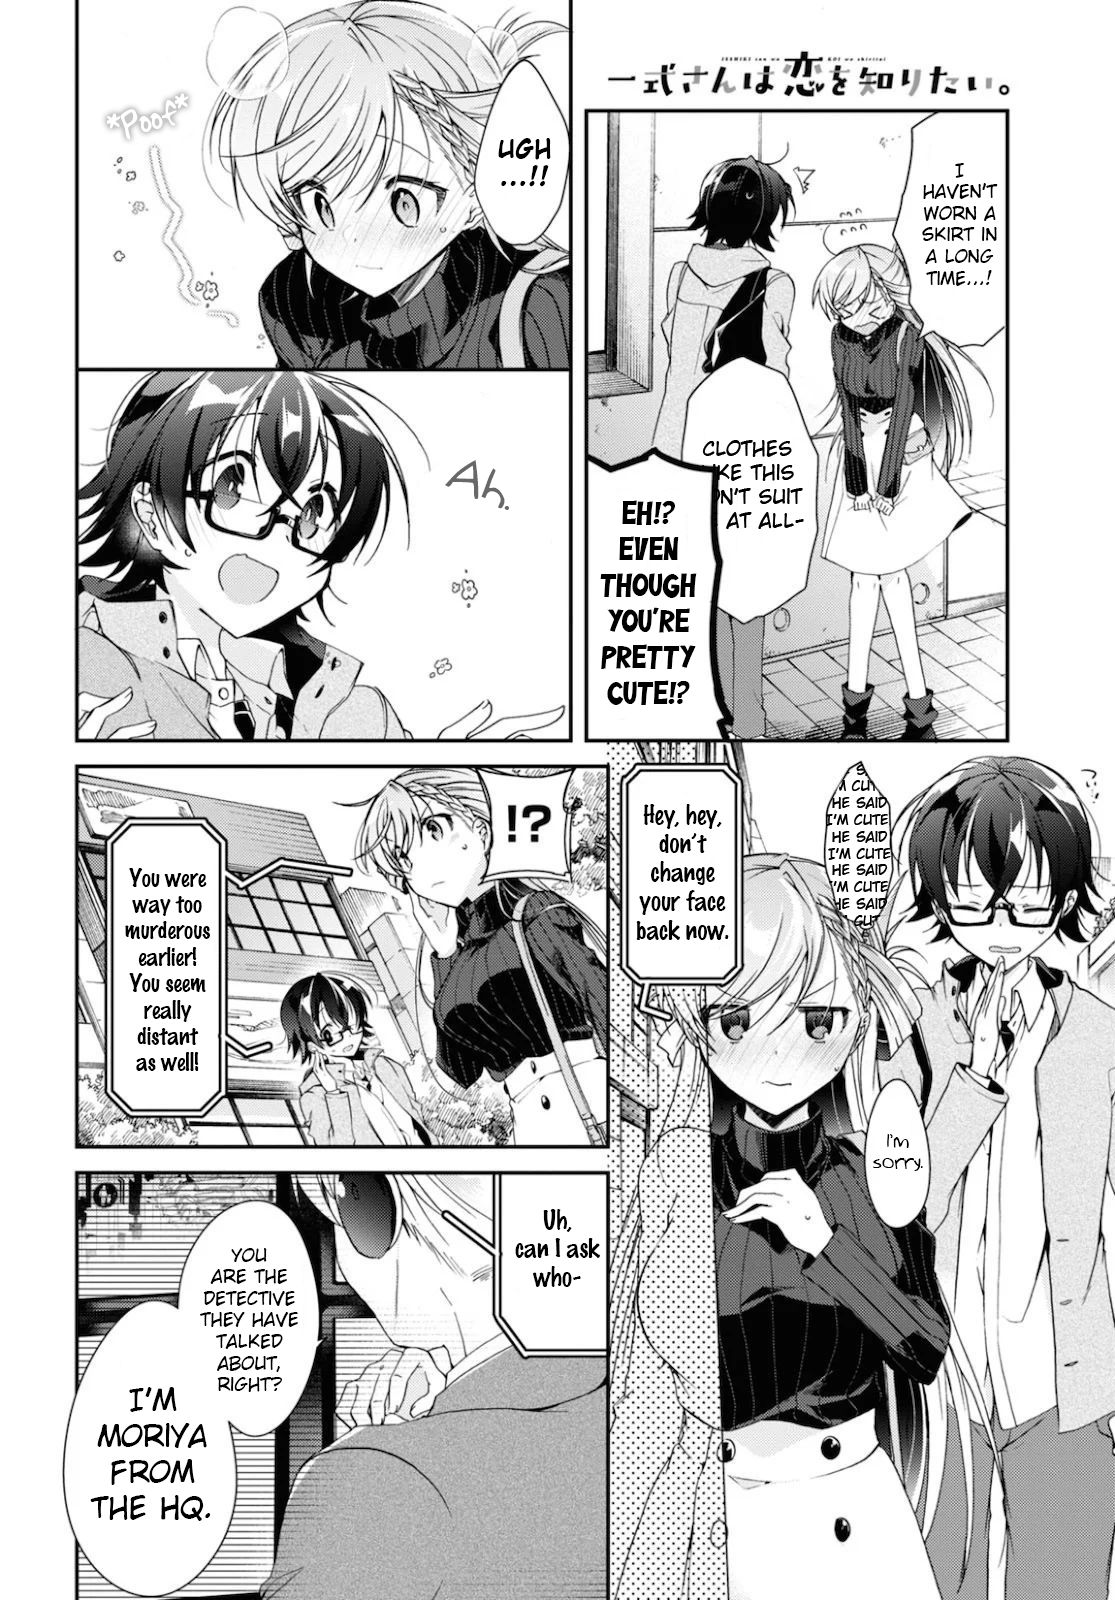 Isshiki-san Wants to Know About Love. - chapter 5 - #6